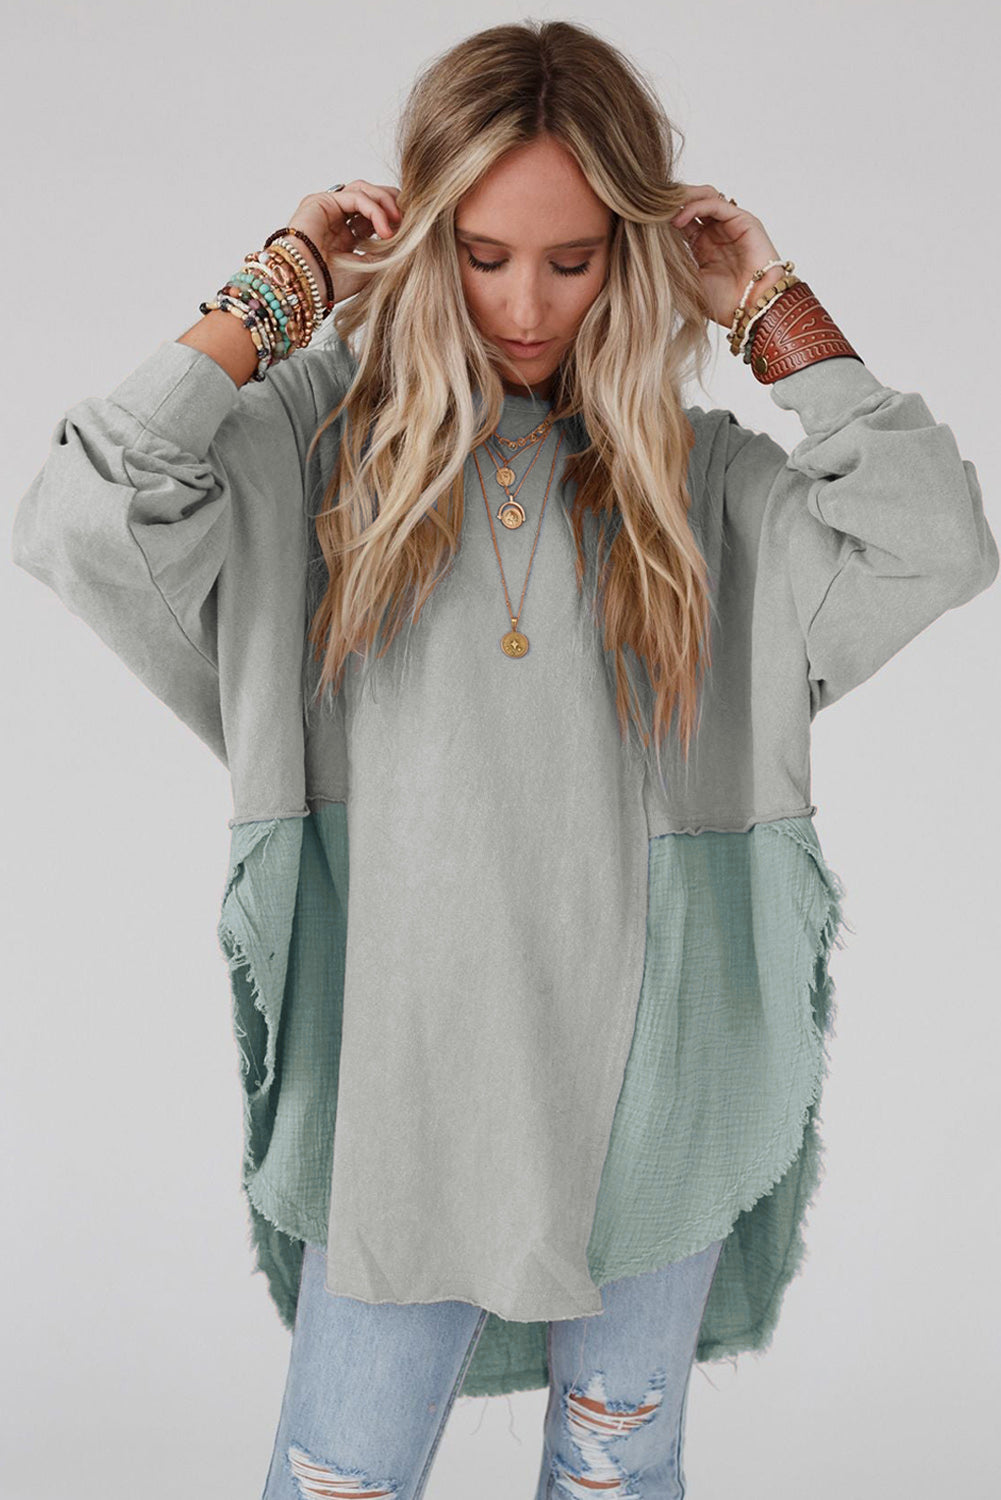 Gray Raw Edge Leopard Patchwork Oversized Blouse